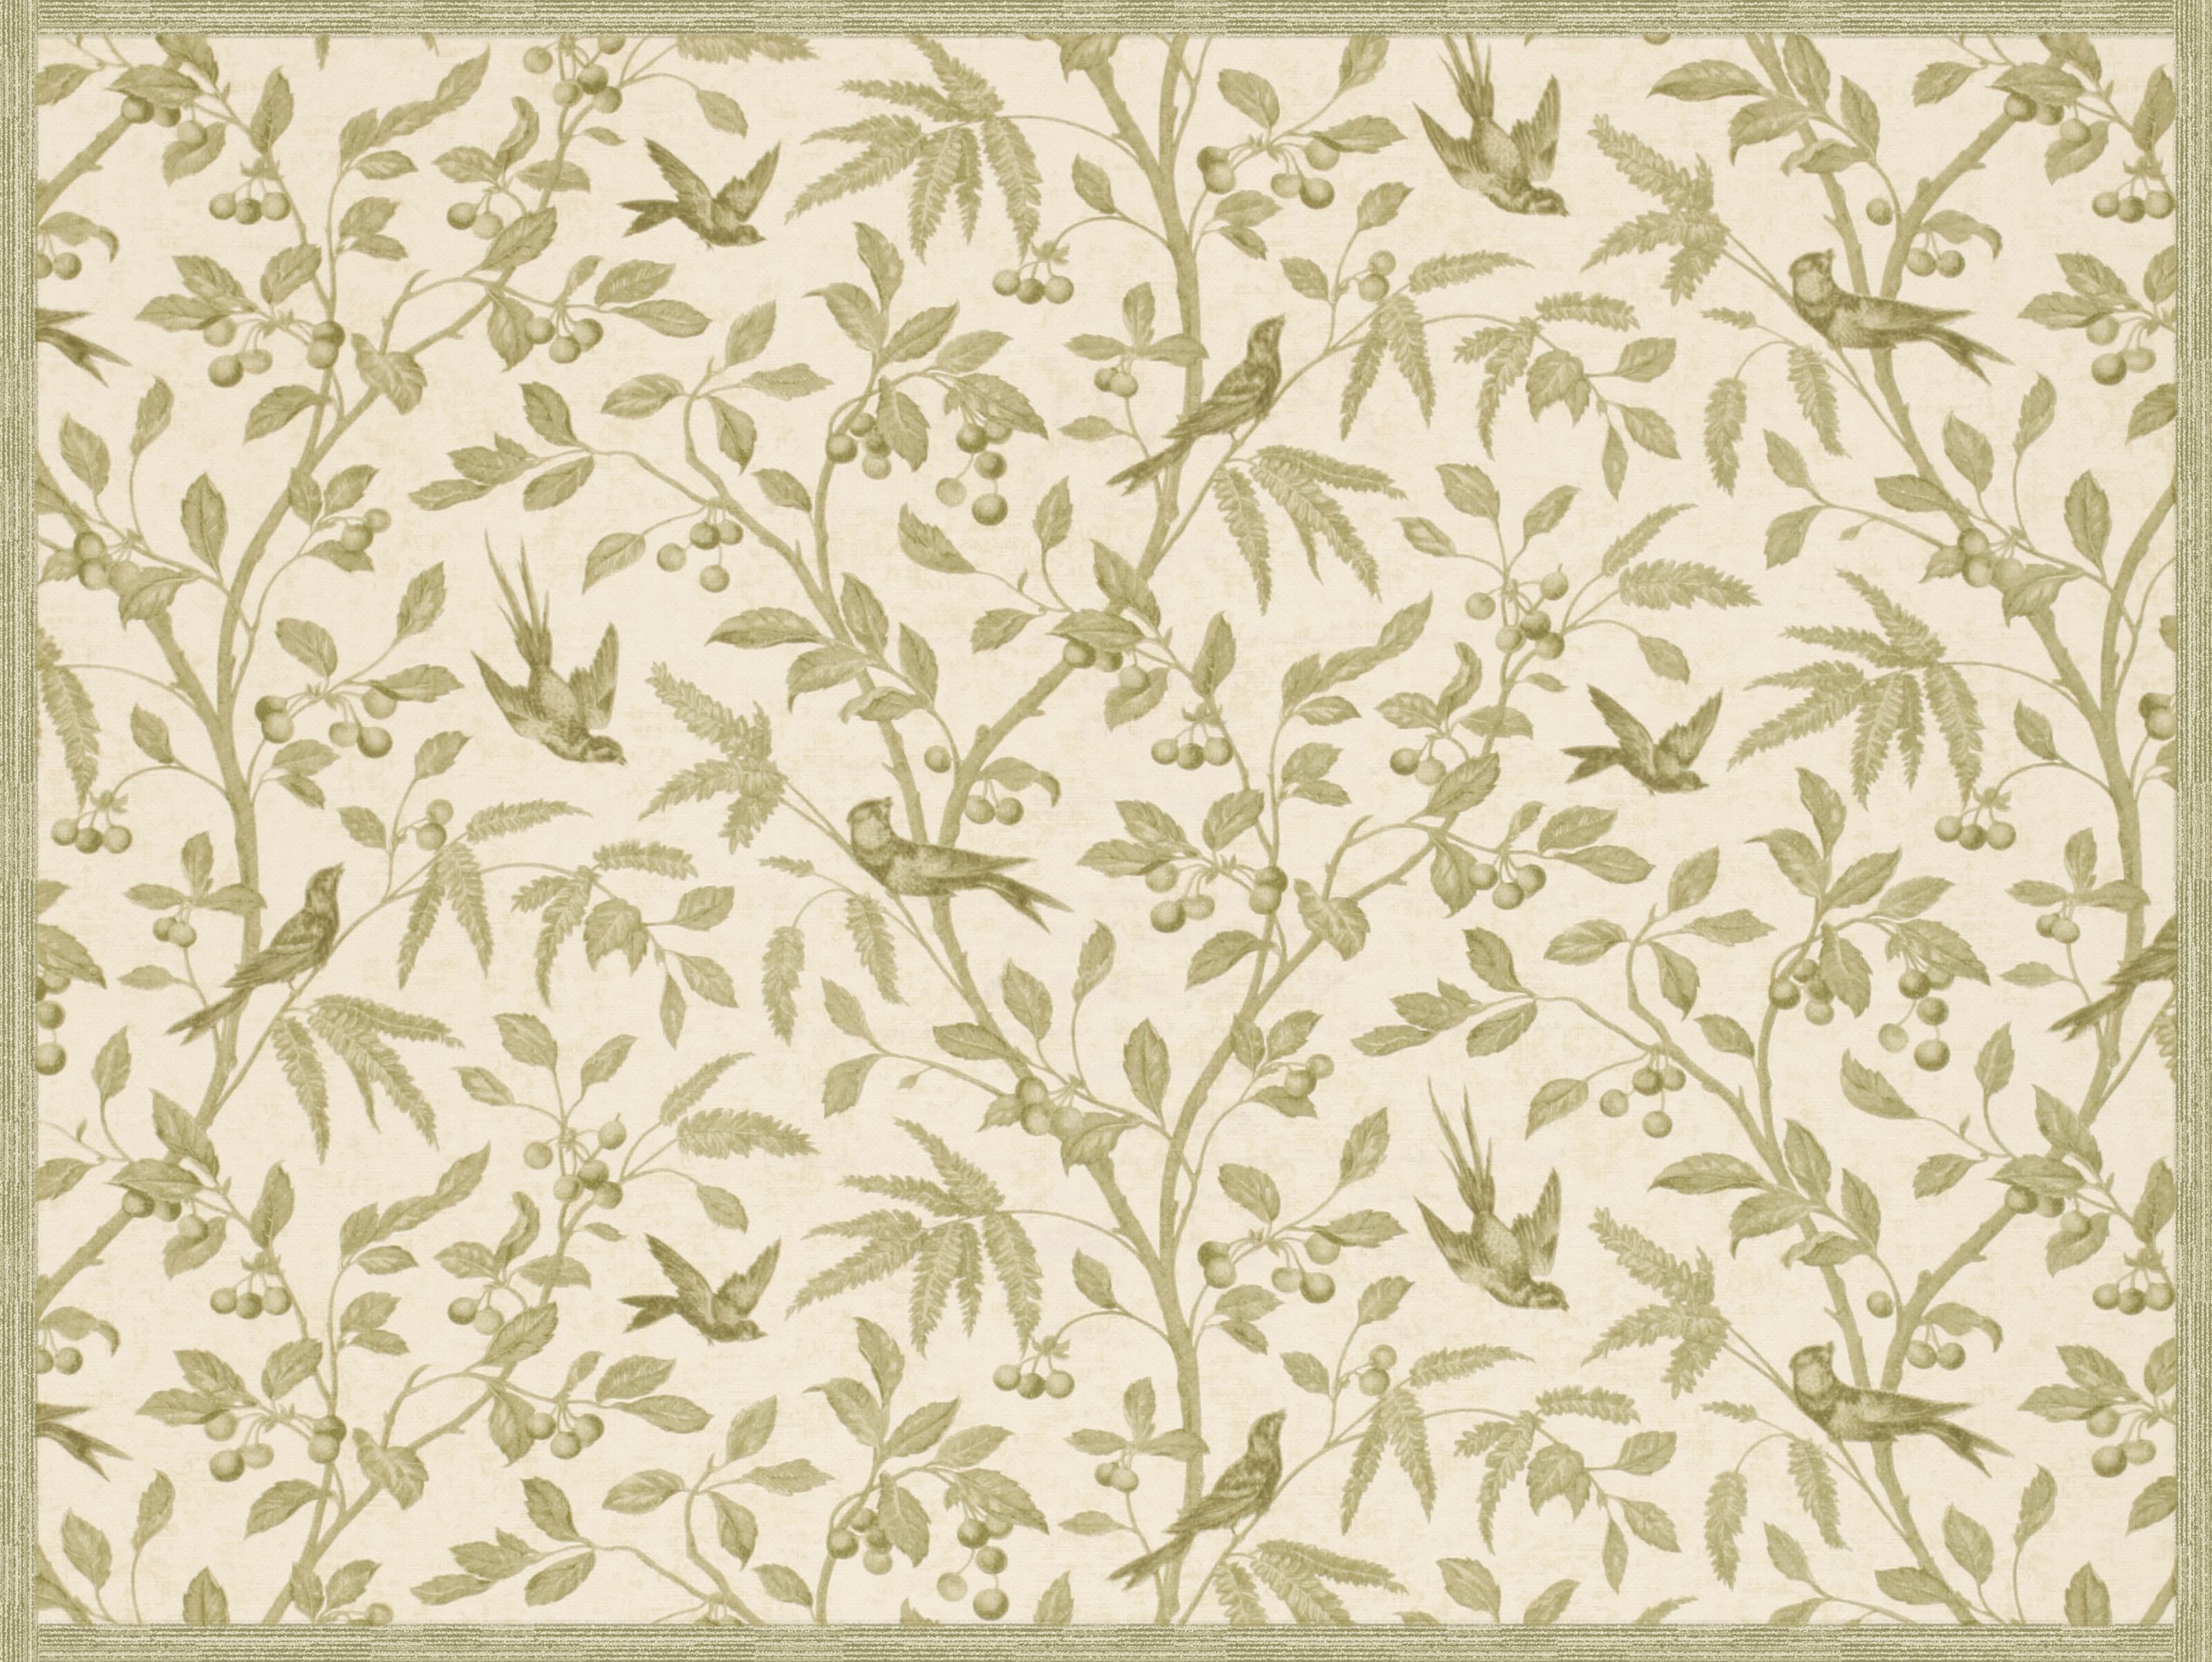 Buy wholesale placemats | birds branches and beige Placemats - Washable